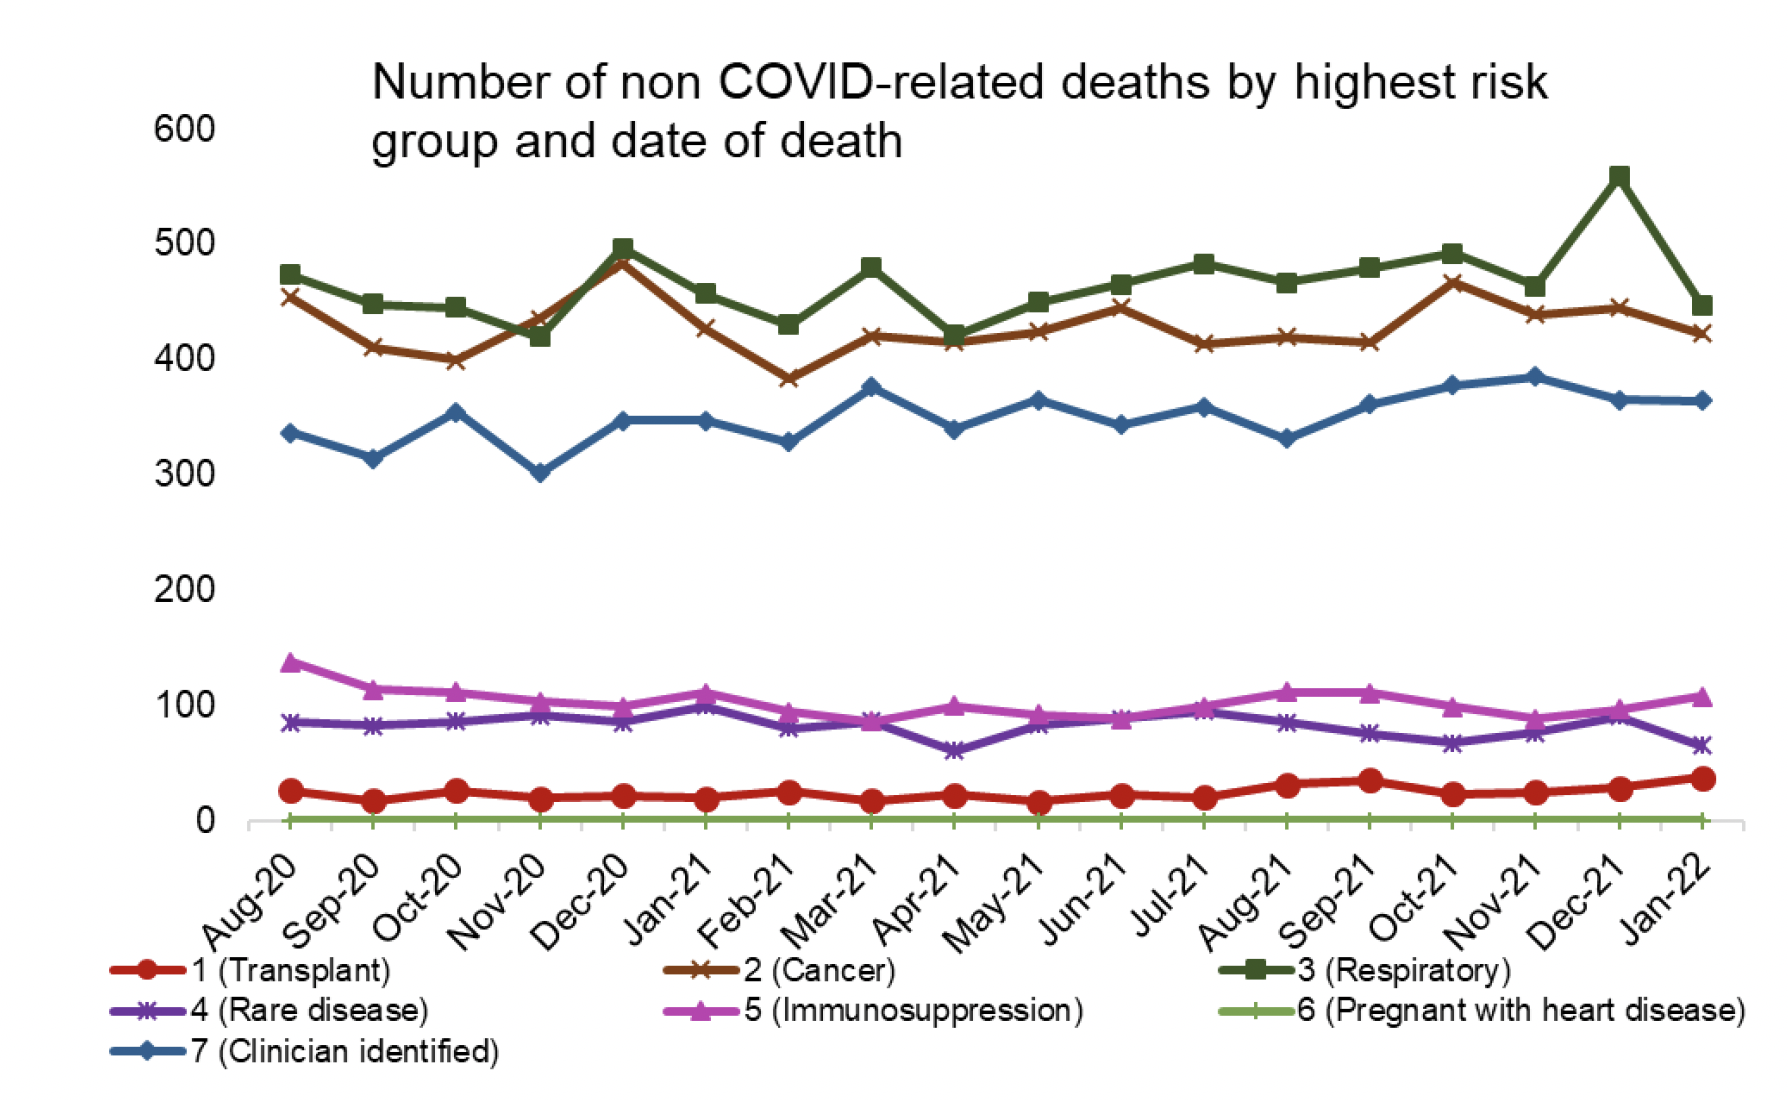 Figure 6 shows the proportion of people on the highest risk groups who died from COVID-related causes within 28 days after a positive test. The proportion of people on the Highest Risk List dying of COVID-related causes within 28 days after a positive test fell from a high of 19% in January 2021 to 6% by April 2021 and it remained around this level until December 2021 when it dropped further to 2% (the lowest in the time series).